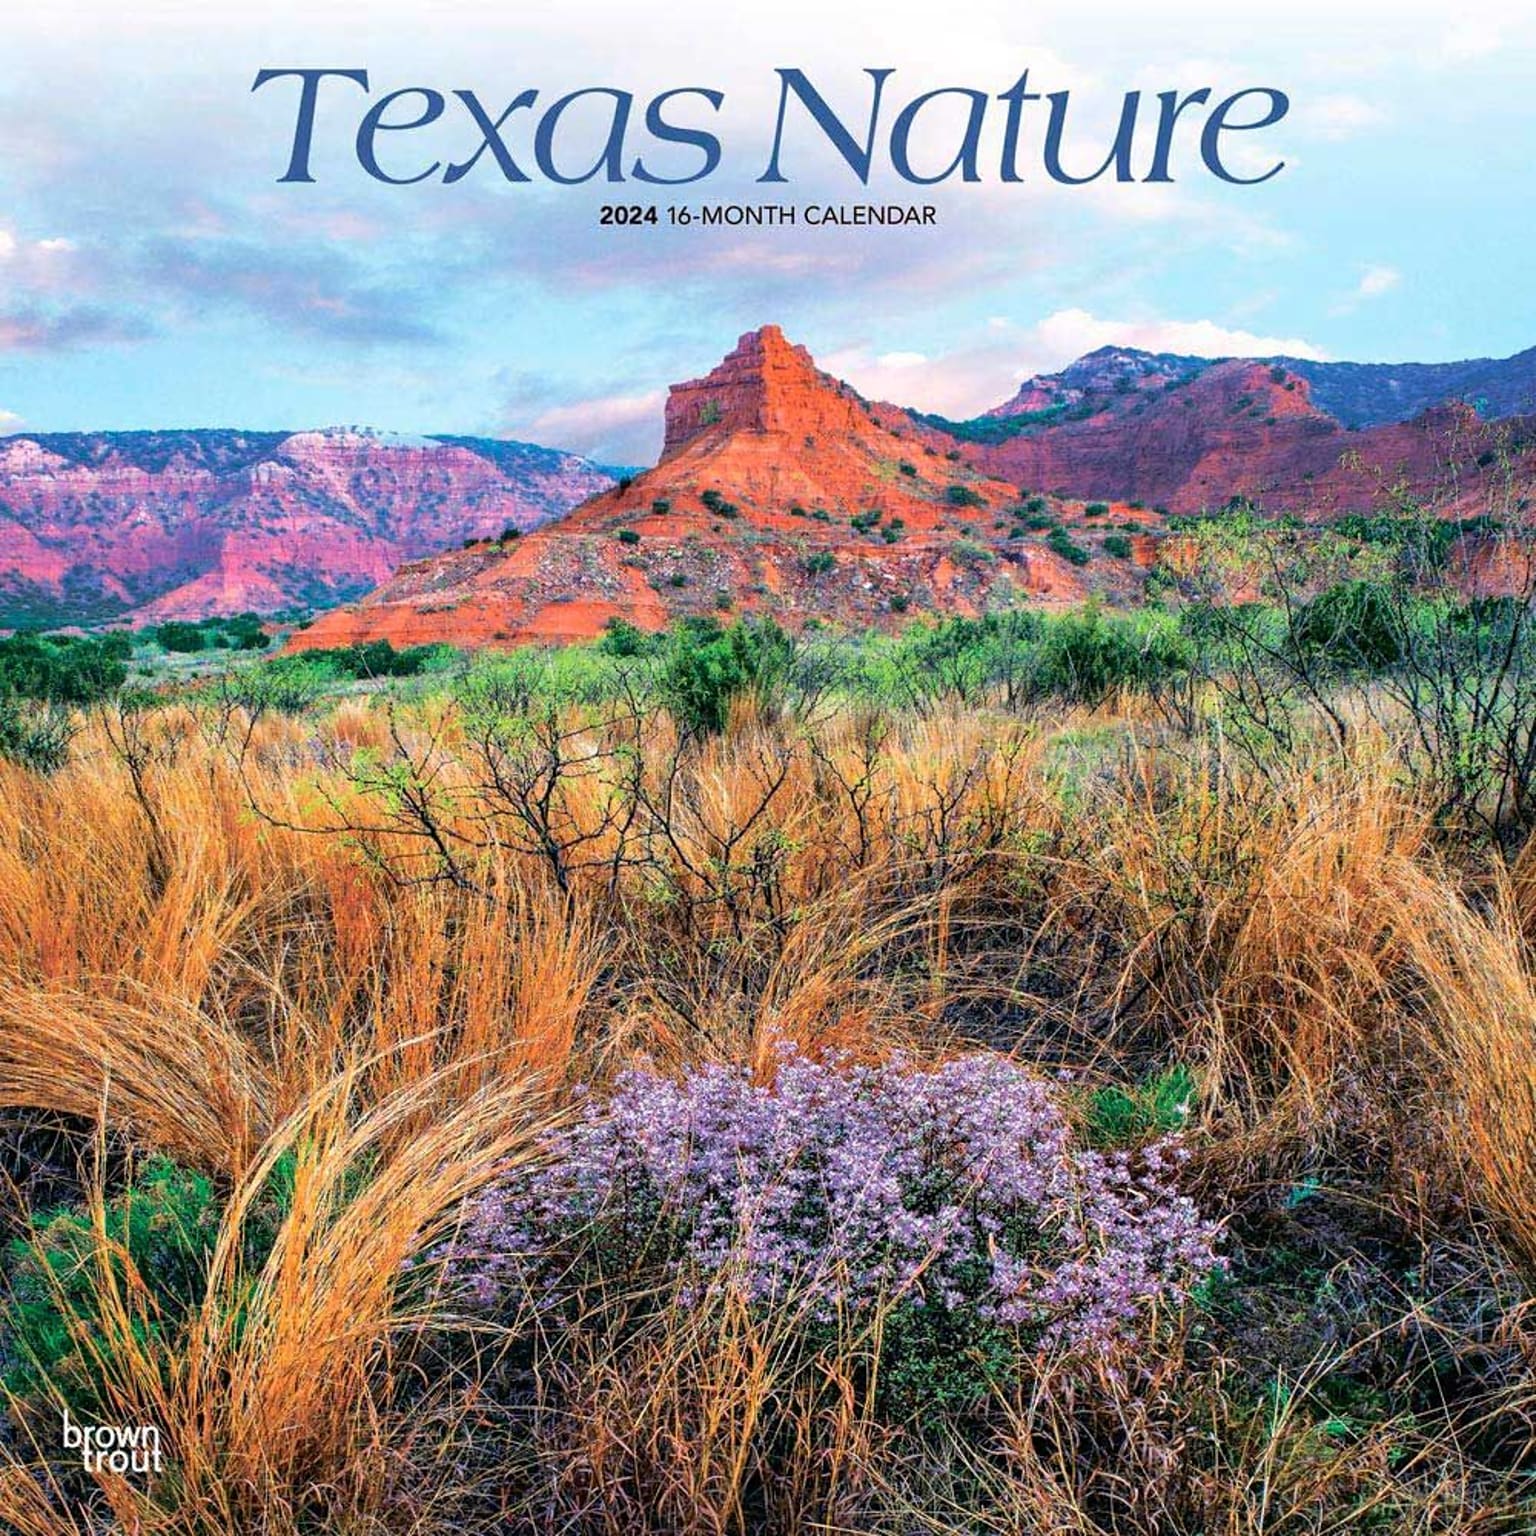 2024 BrownTrout Texas Nature 12 x 24 Monthly Wall Calendar (9781975465308)